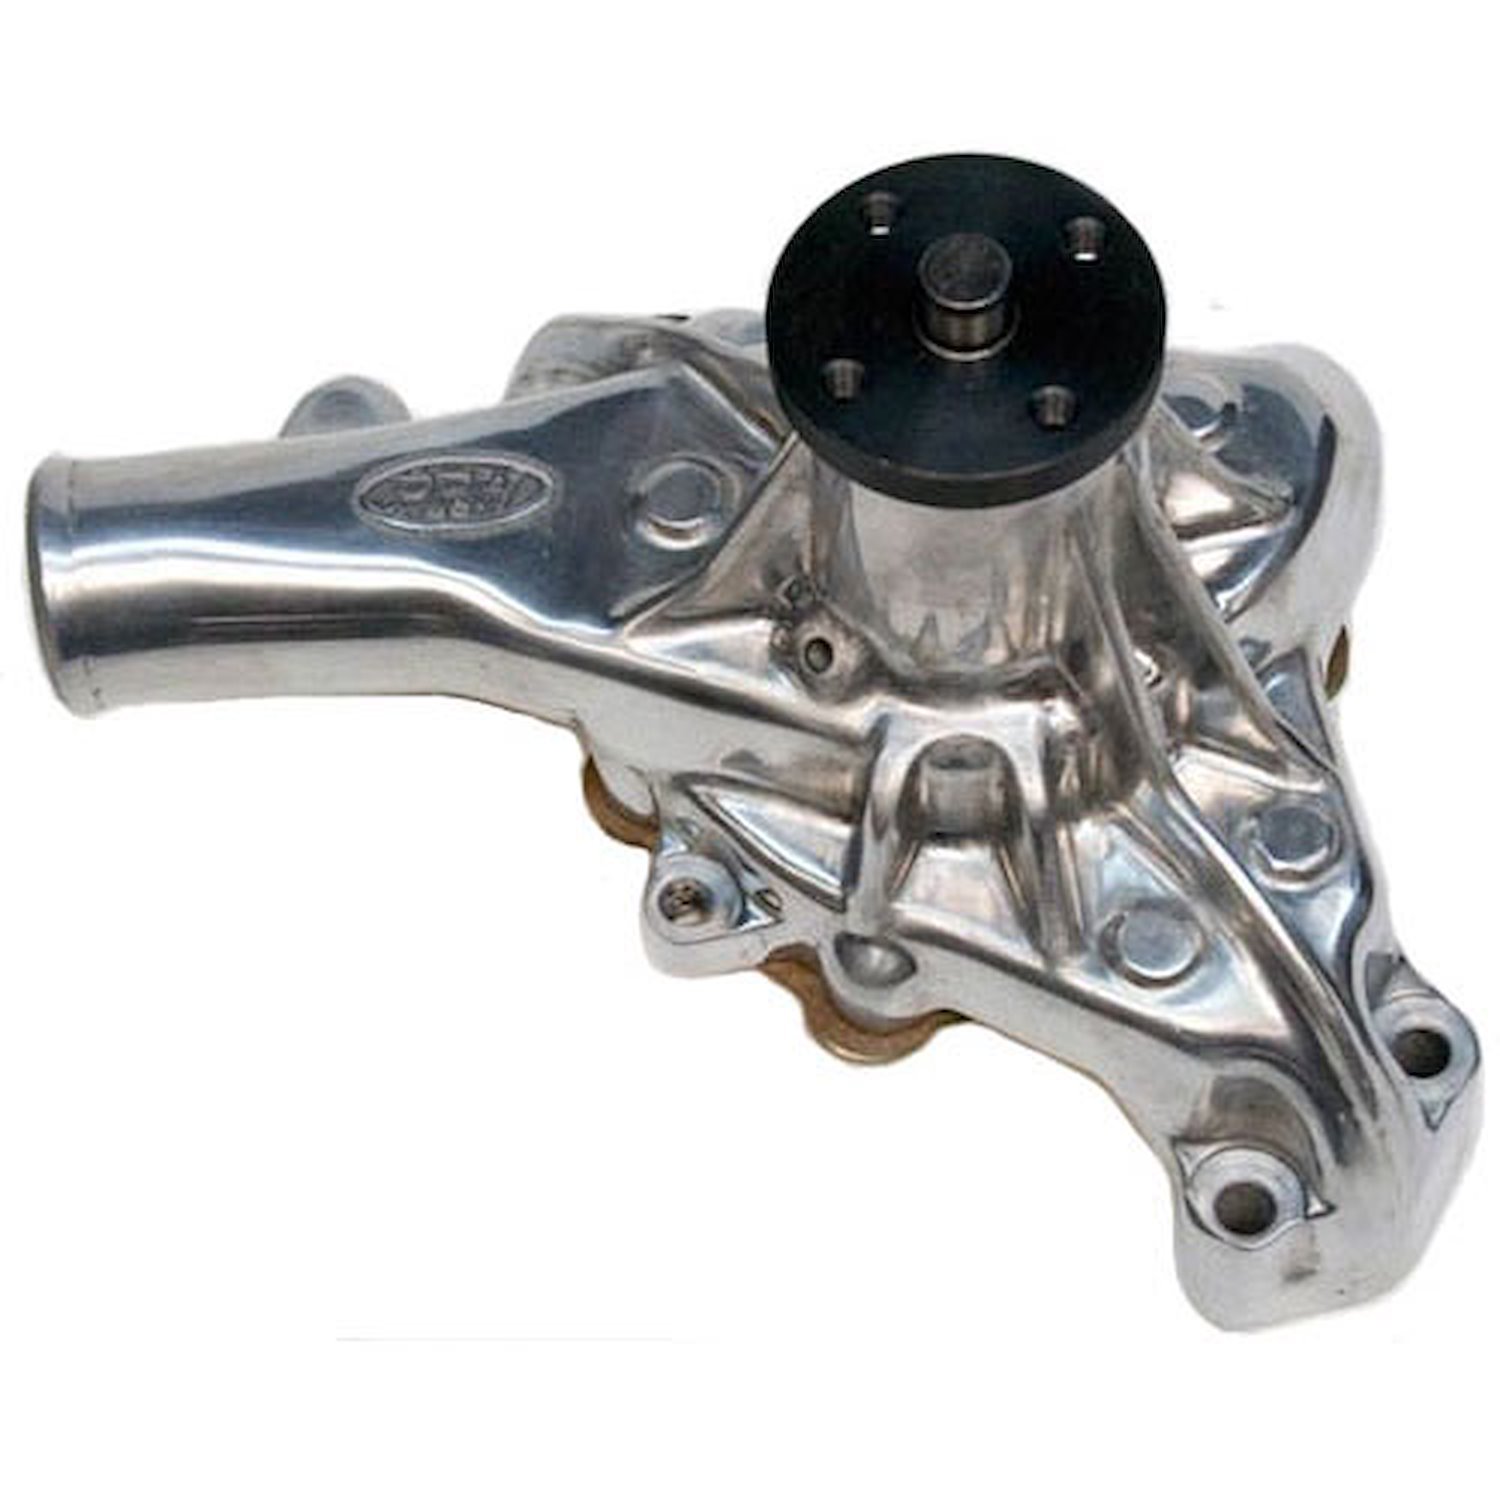 High-Performance Aluminum Water Pump 1987-95 Chevy V6 and Small Block V8